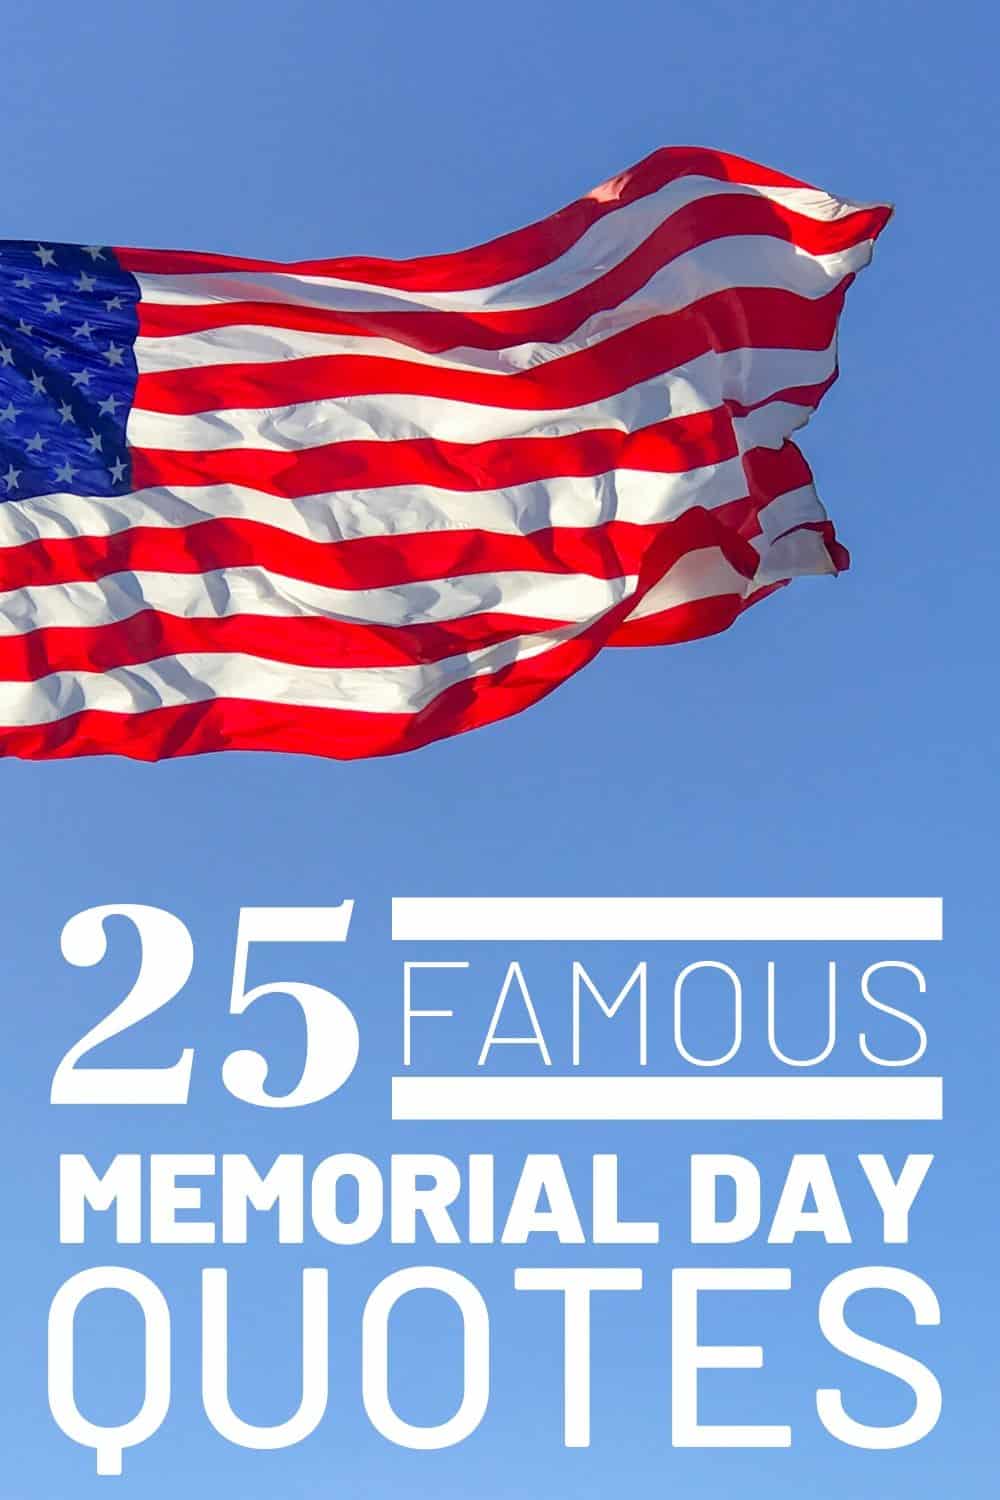 25 Famous Memorial Day Quotes for 2022 #cheerfulcook #memorialday #quotes ♡ cheerfulcook.com